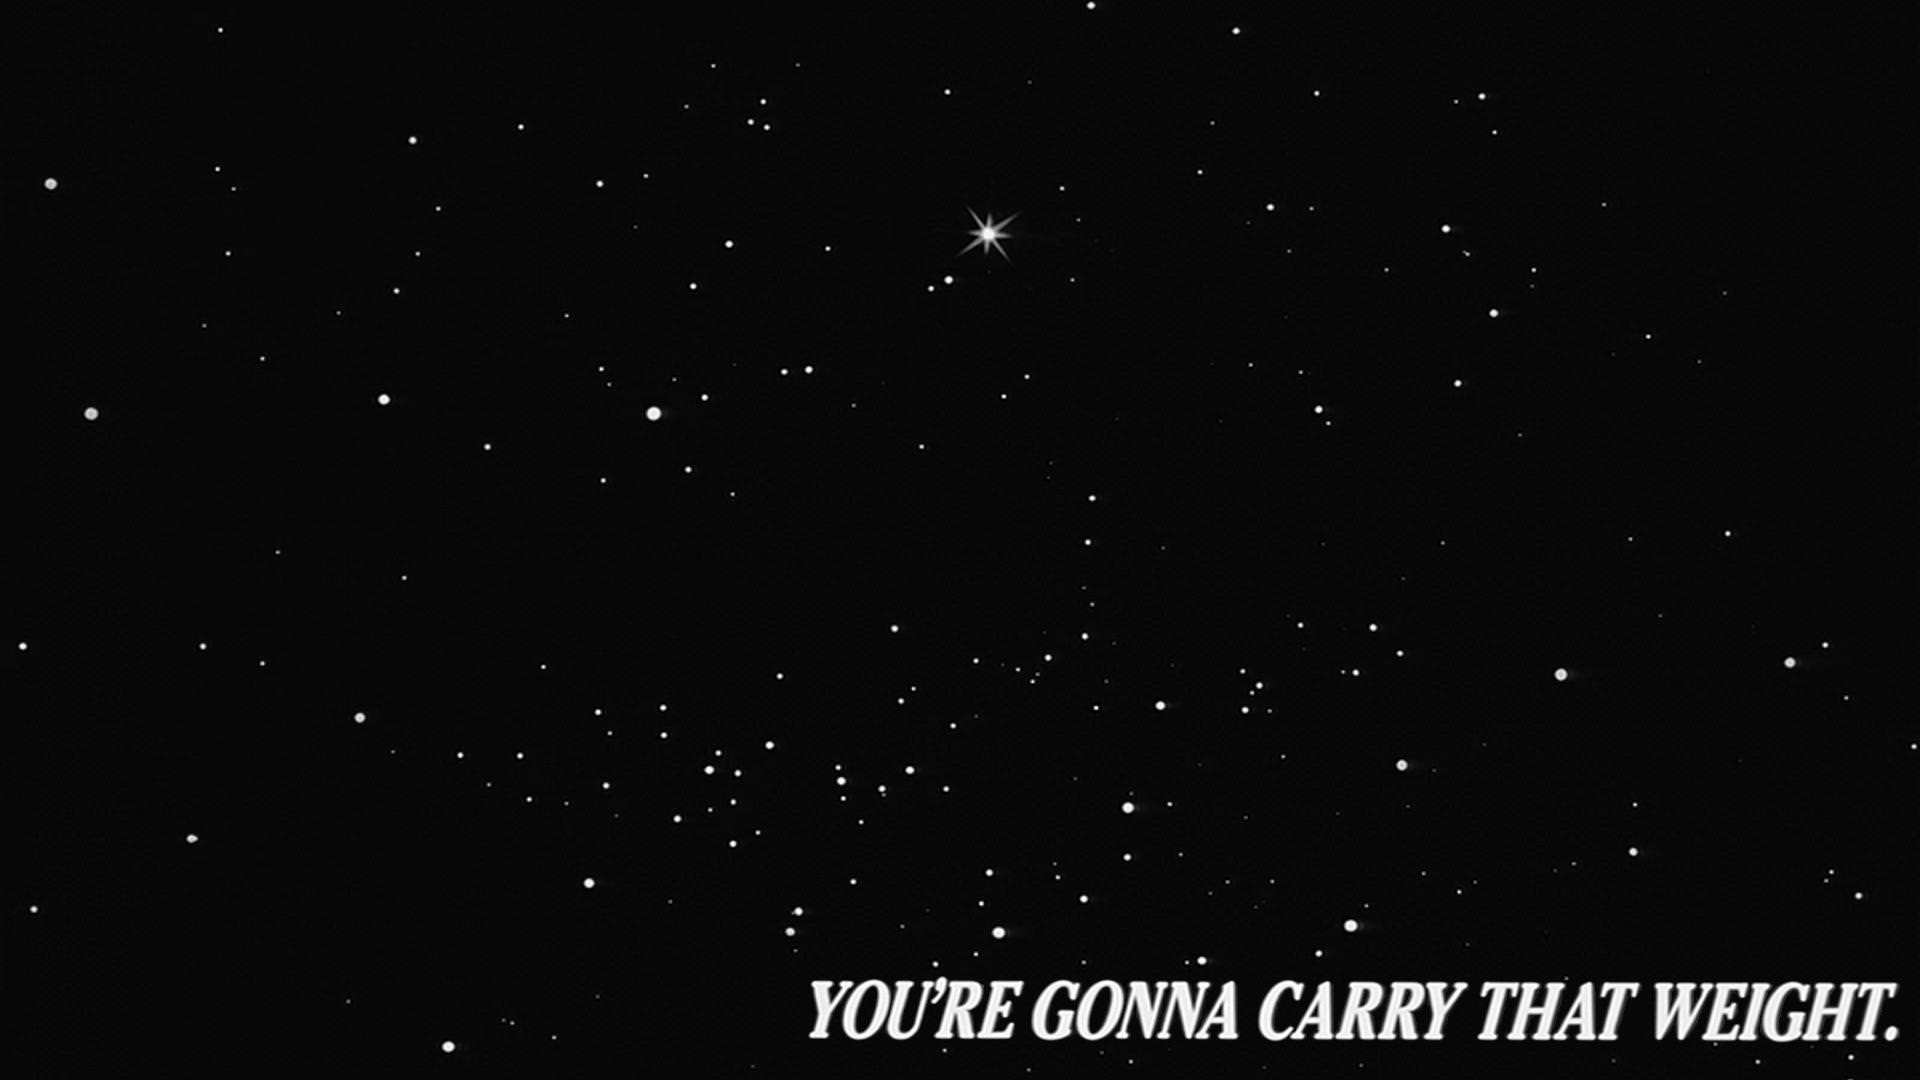 The Beatles Cowboy Bebop Youre Gonna Carry That Weight Minimalism Quote 1920x1080